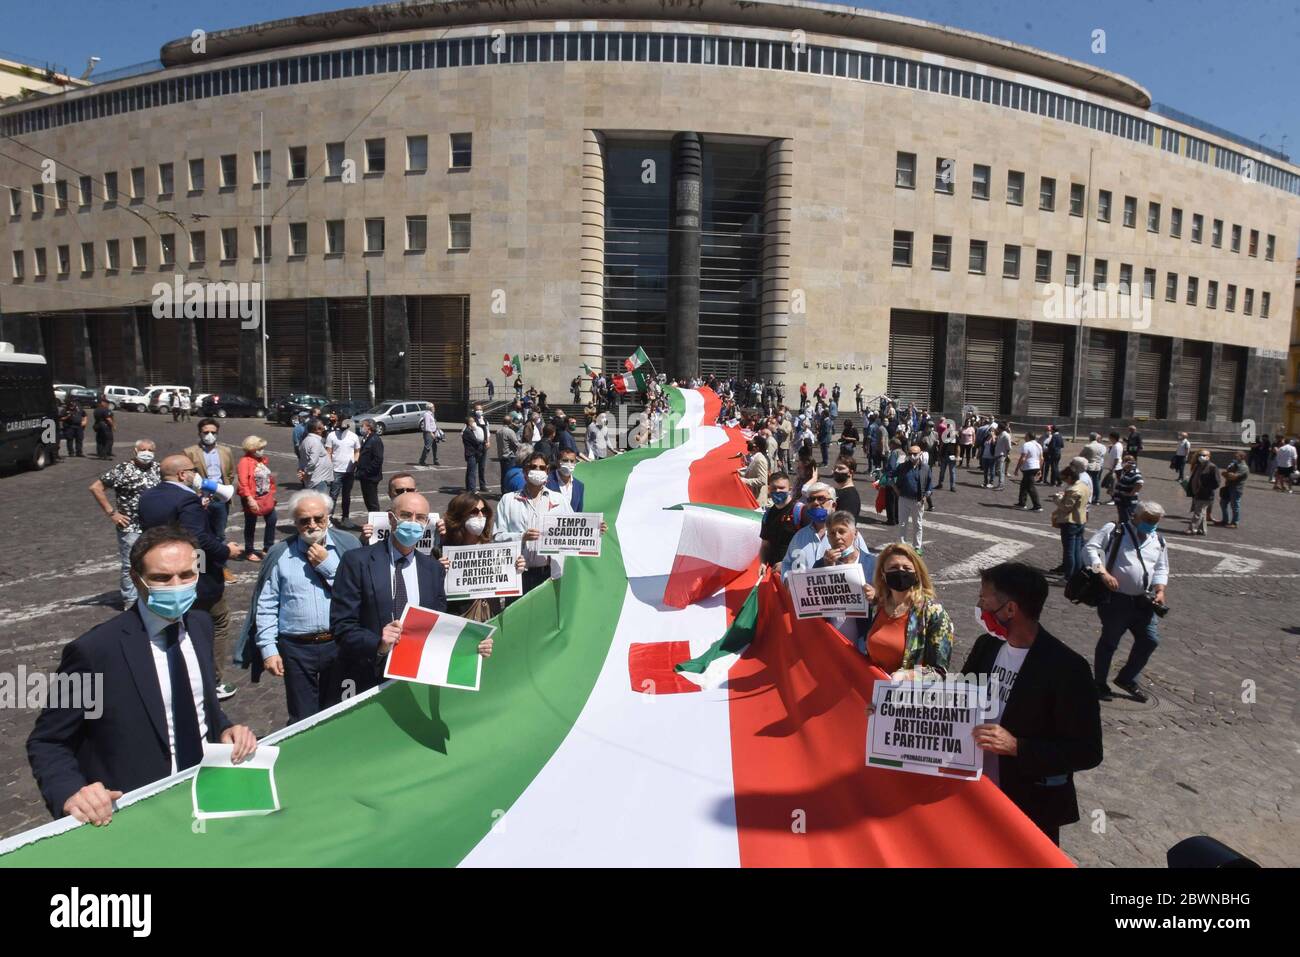 People wearing protective mask hold signs writing 'time out', 'real aid for dealers, profassionals and artisans' and 'flat tax and business confidence' next to a giant banner in the colors of the Italian flag during the Lega per Salvini and FDI ( Fratelli d'Italia) Parties protest against the European Union's aid plans for the countries most affected by the Covid-19 and against Italian Government plan to restart the economy. Stock Photo